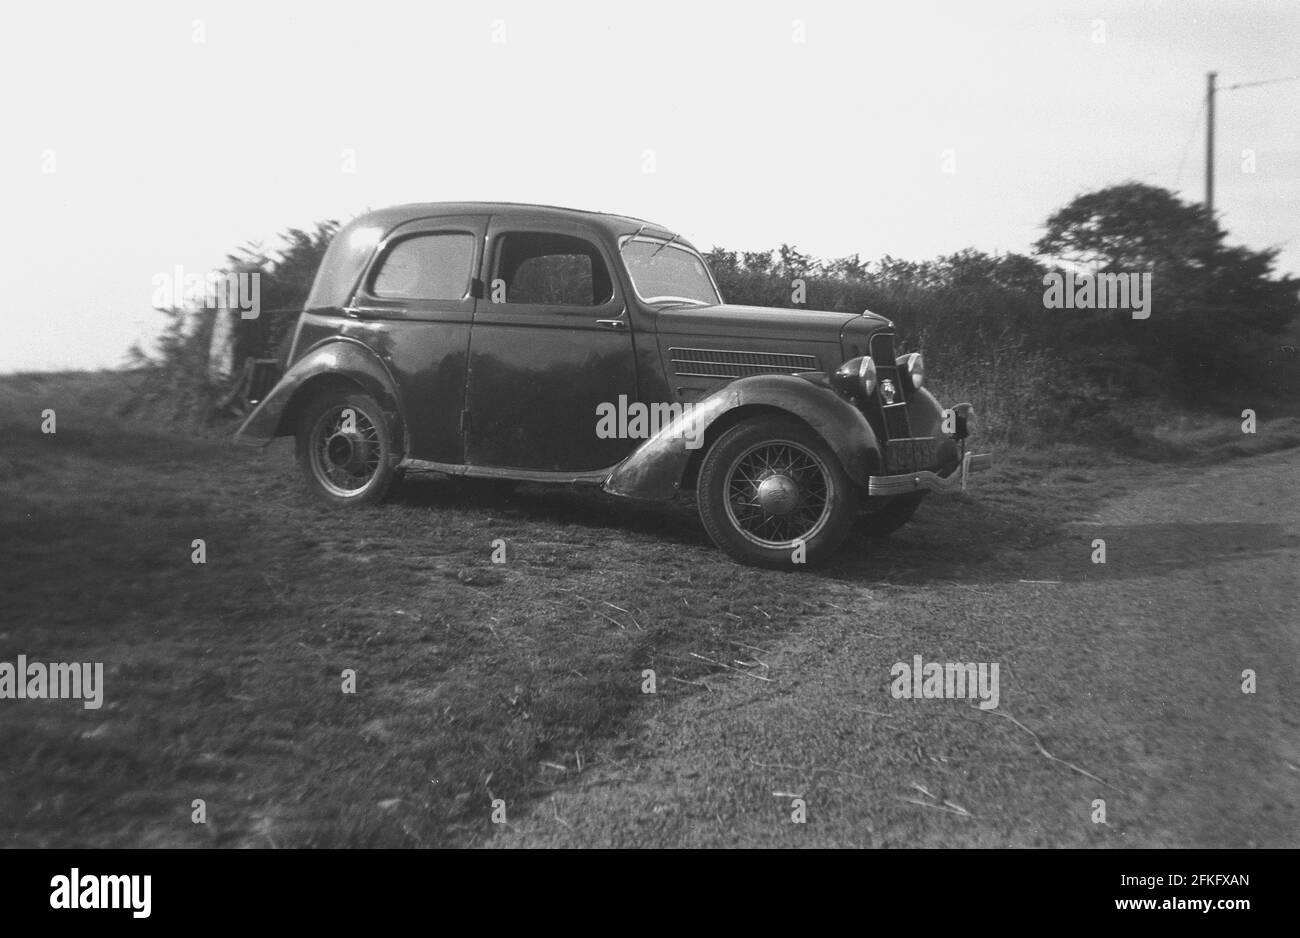 1940s, historical, side-profile of a Ford car of the era with wire wheels, parked on a grassy verge or side area of a country lane, England, UK. Stock Photo